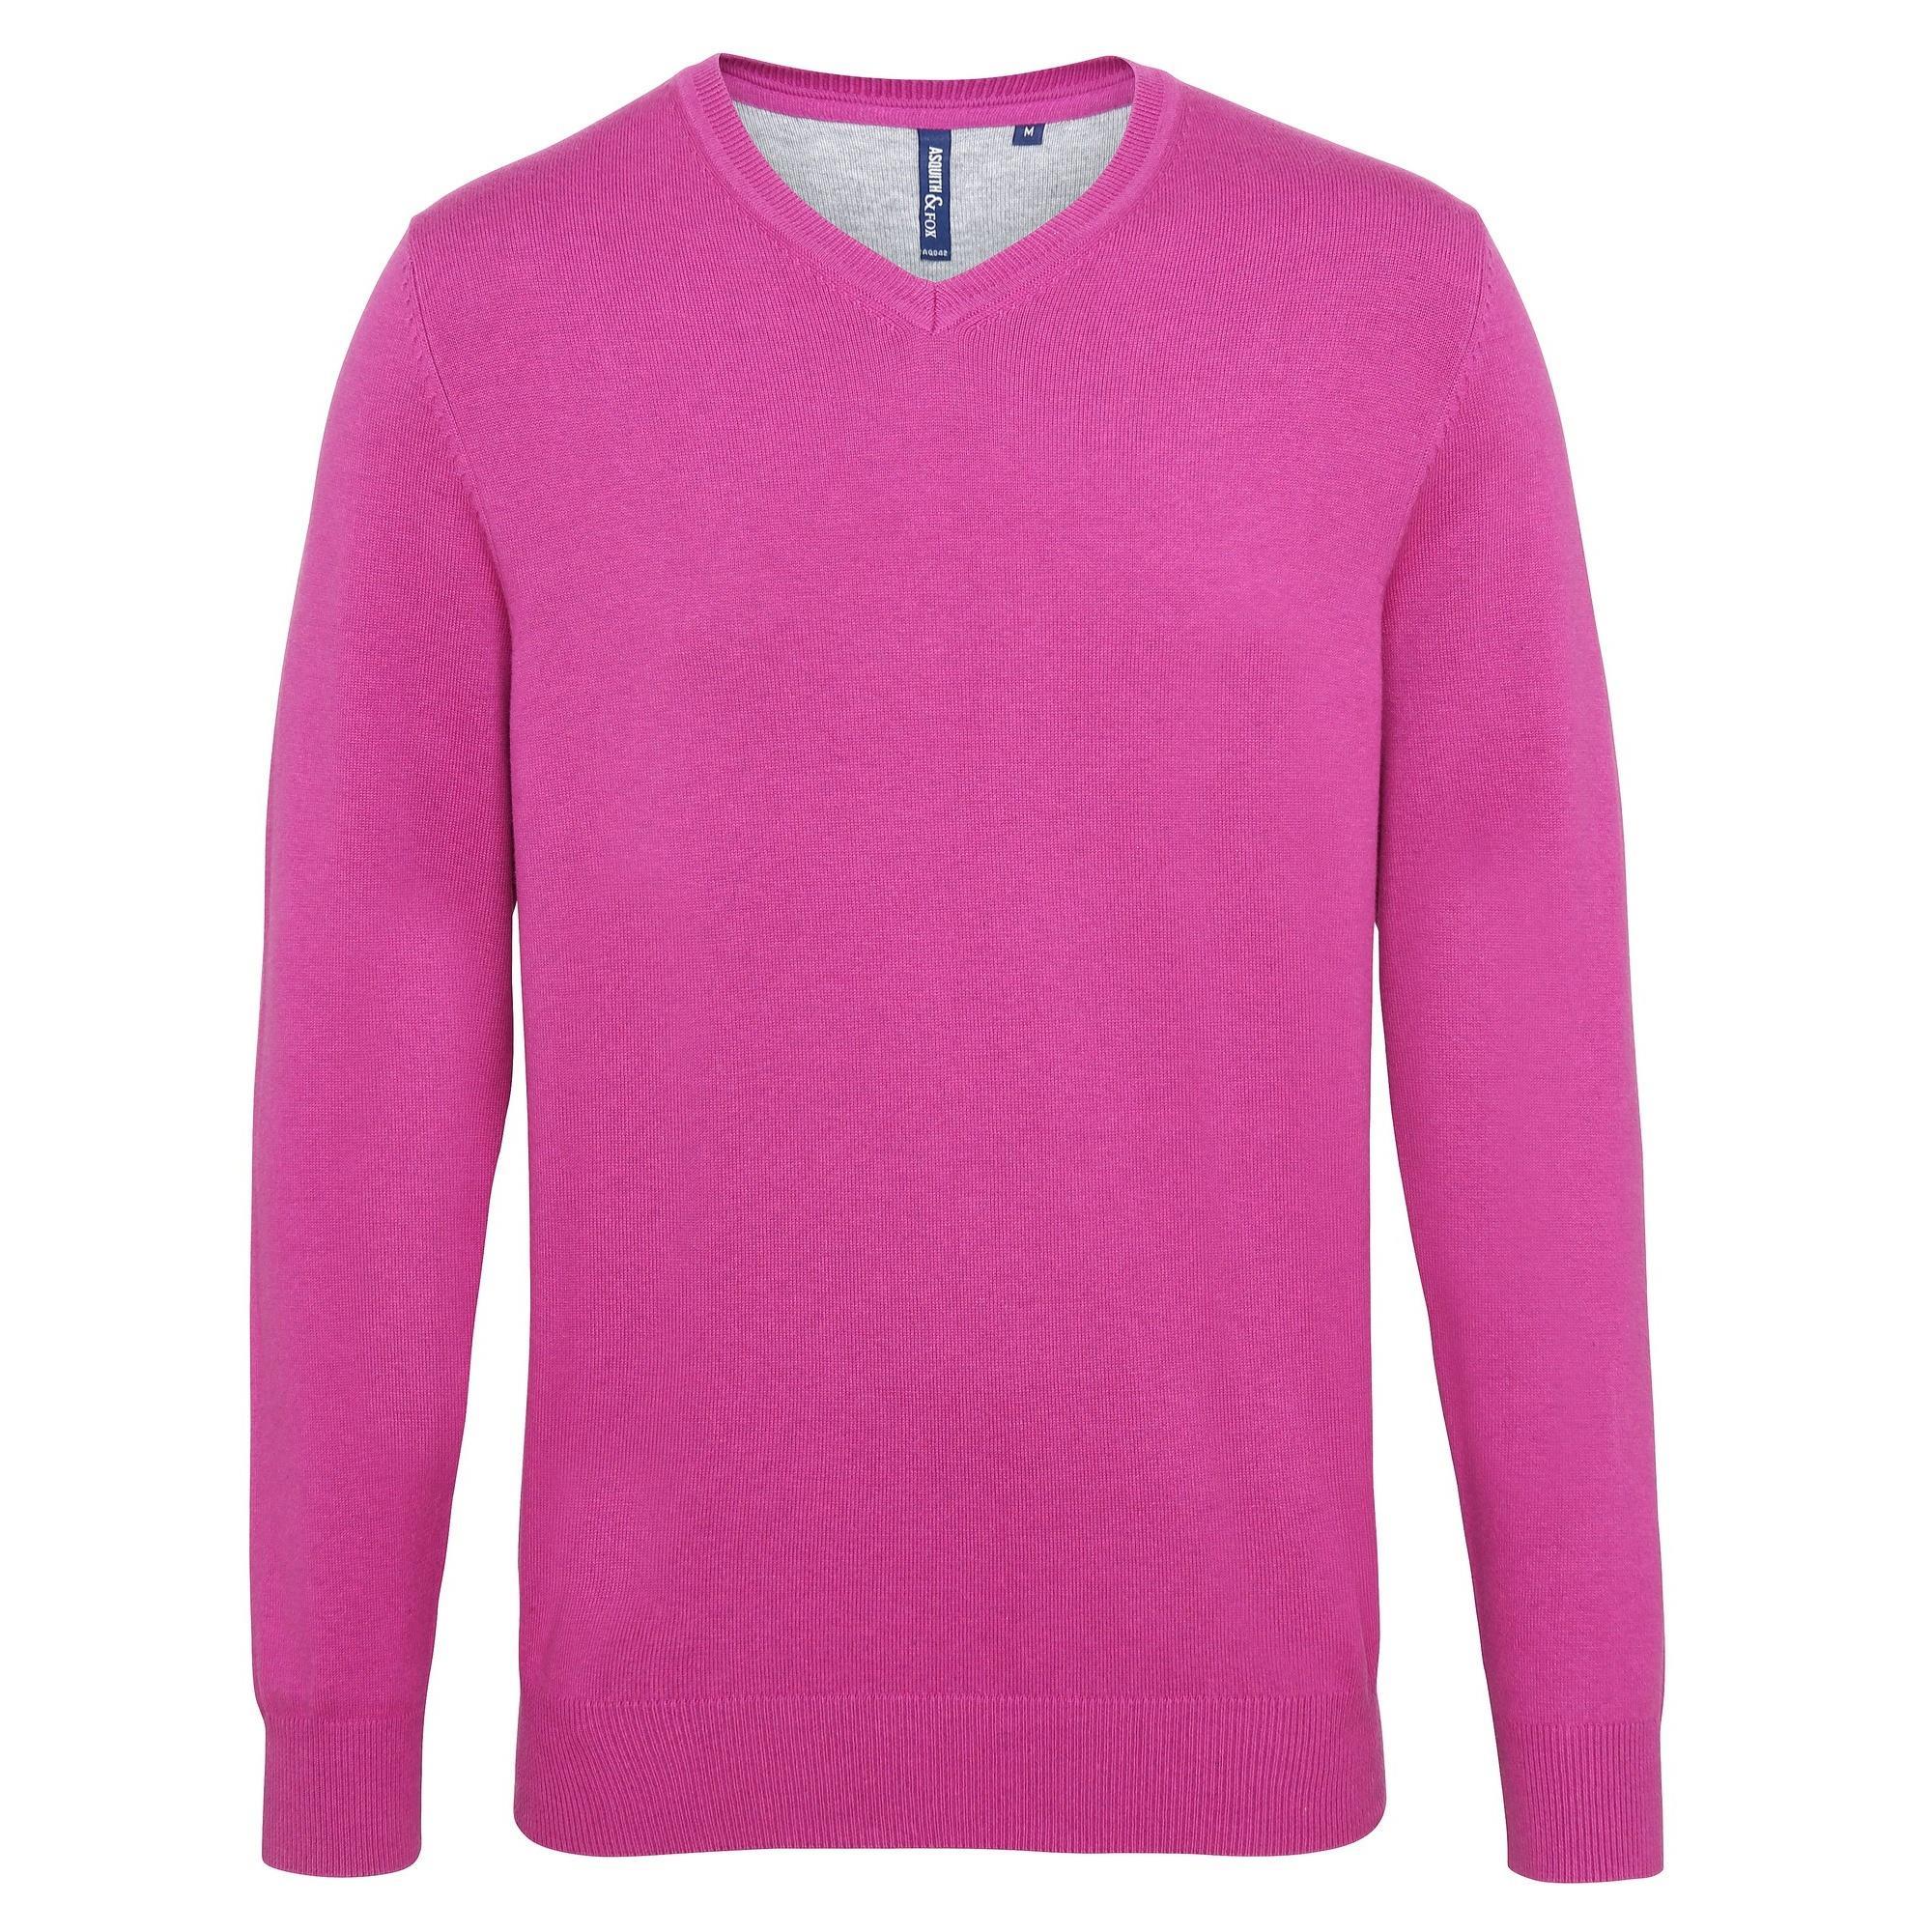 Asquith & Fox Mens Cotton Rich V-Neck Sweater (Orchid Heather) (M)